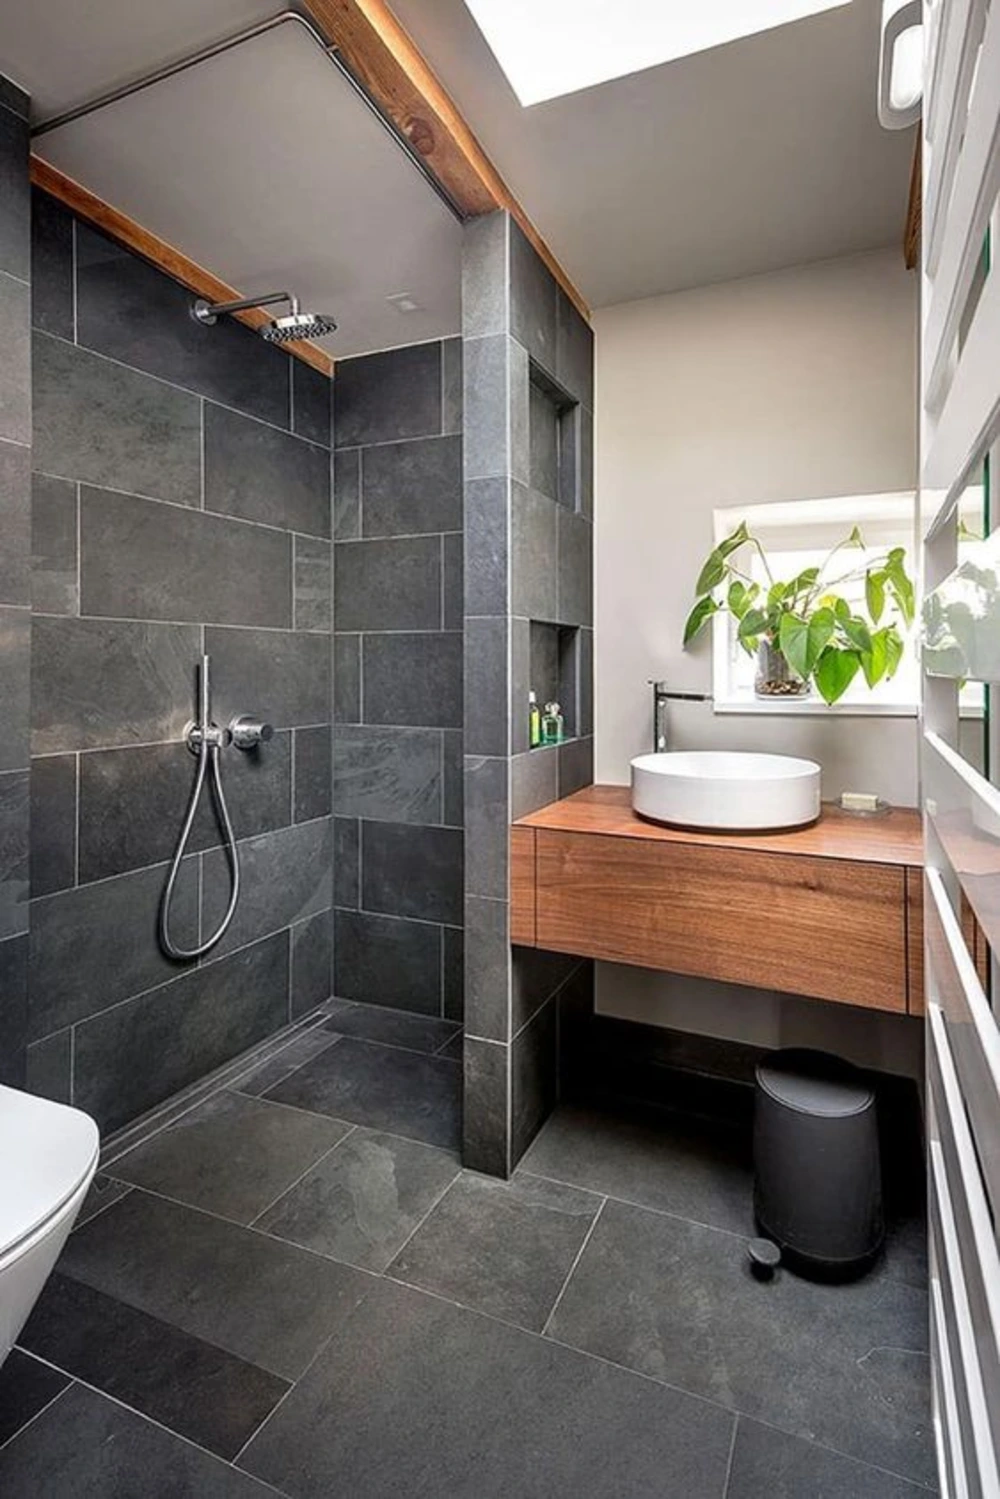 The Best Colors for Small Bathrooms